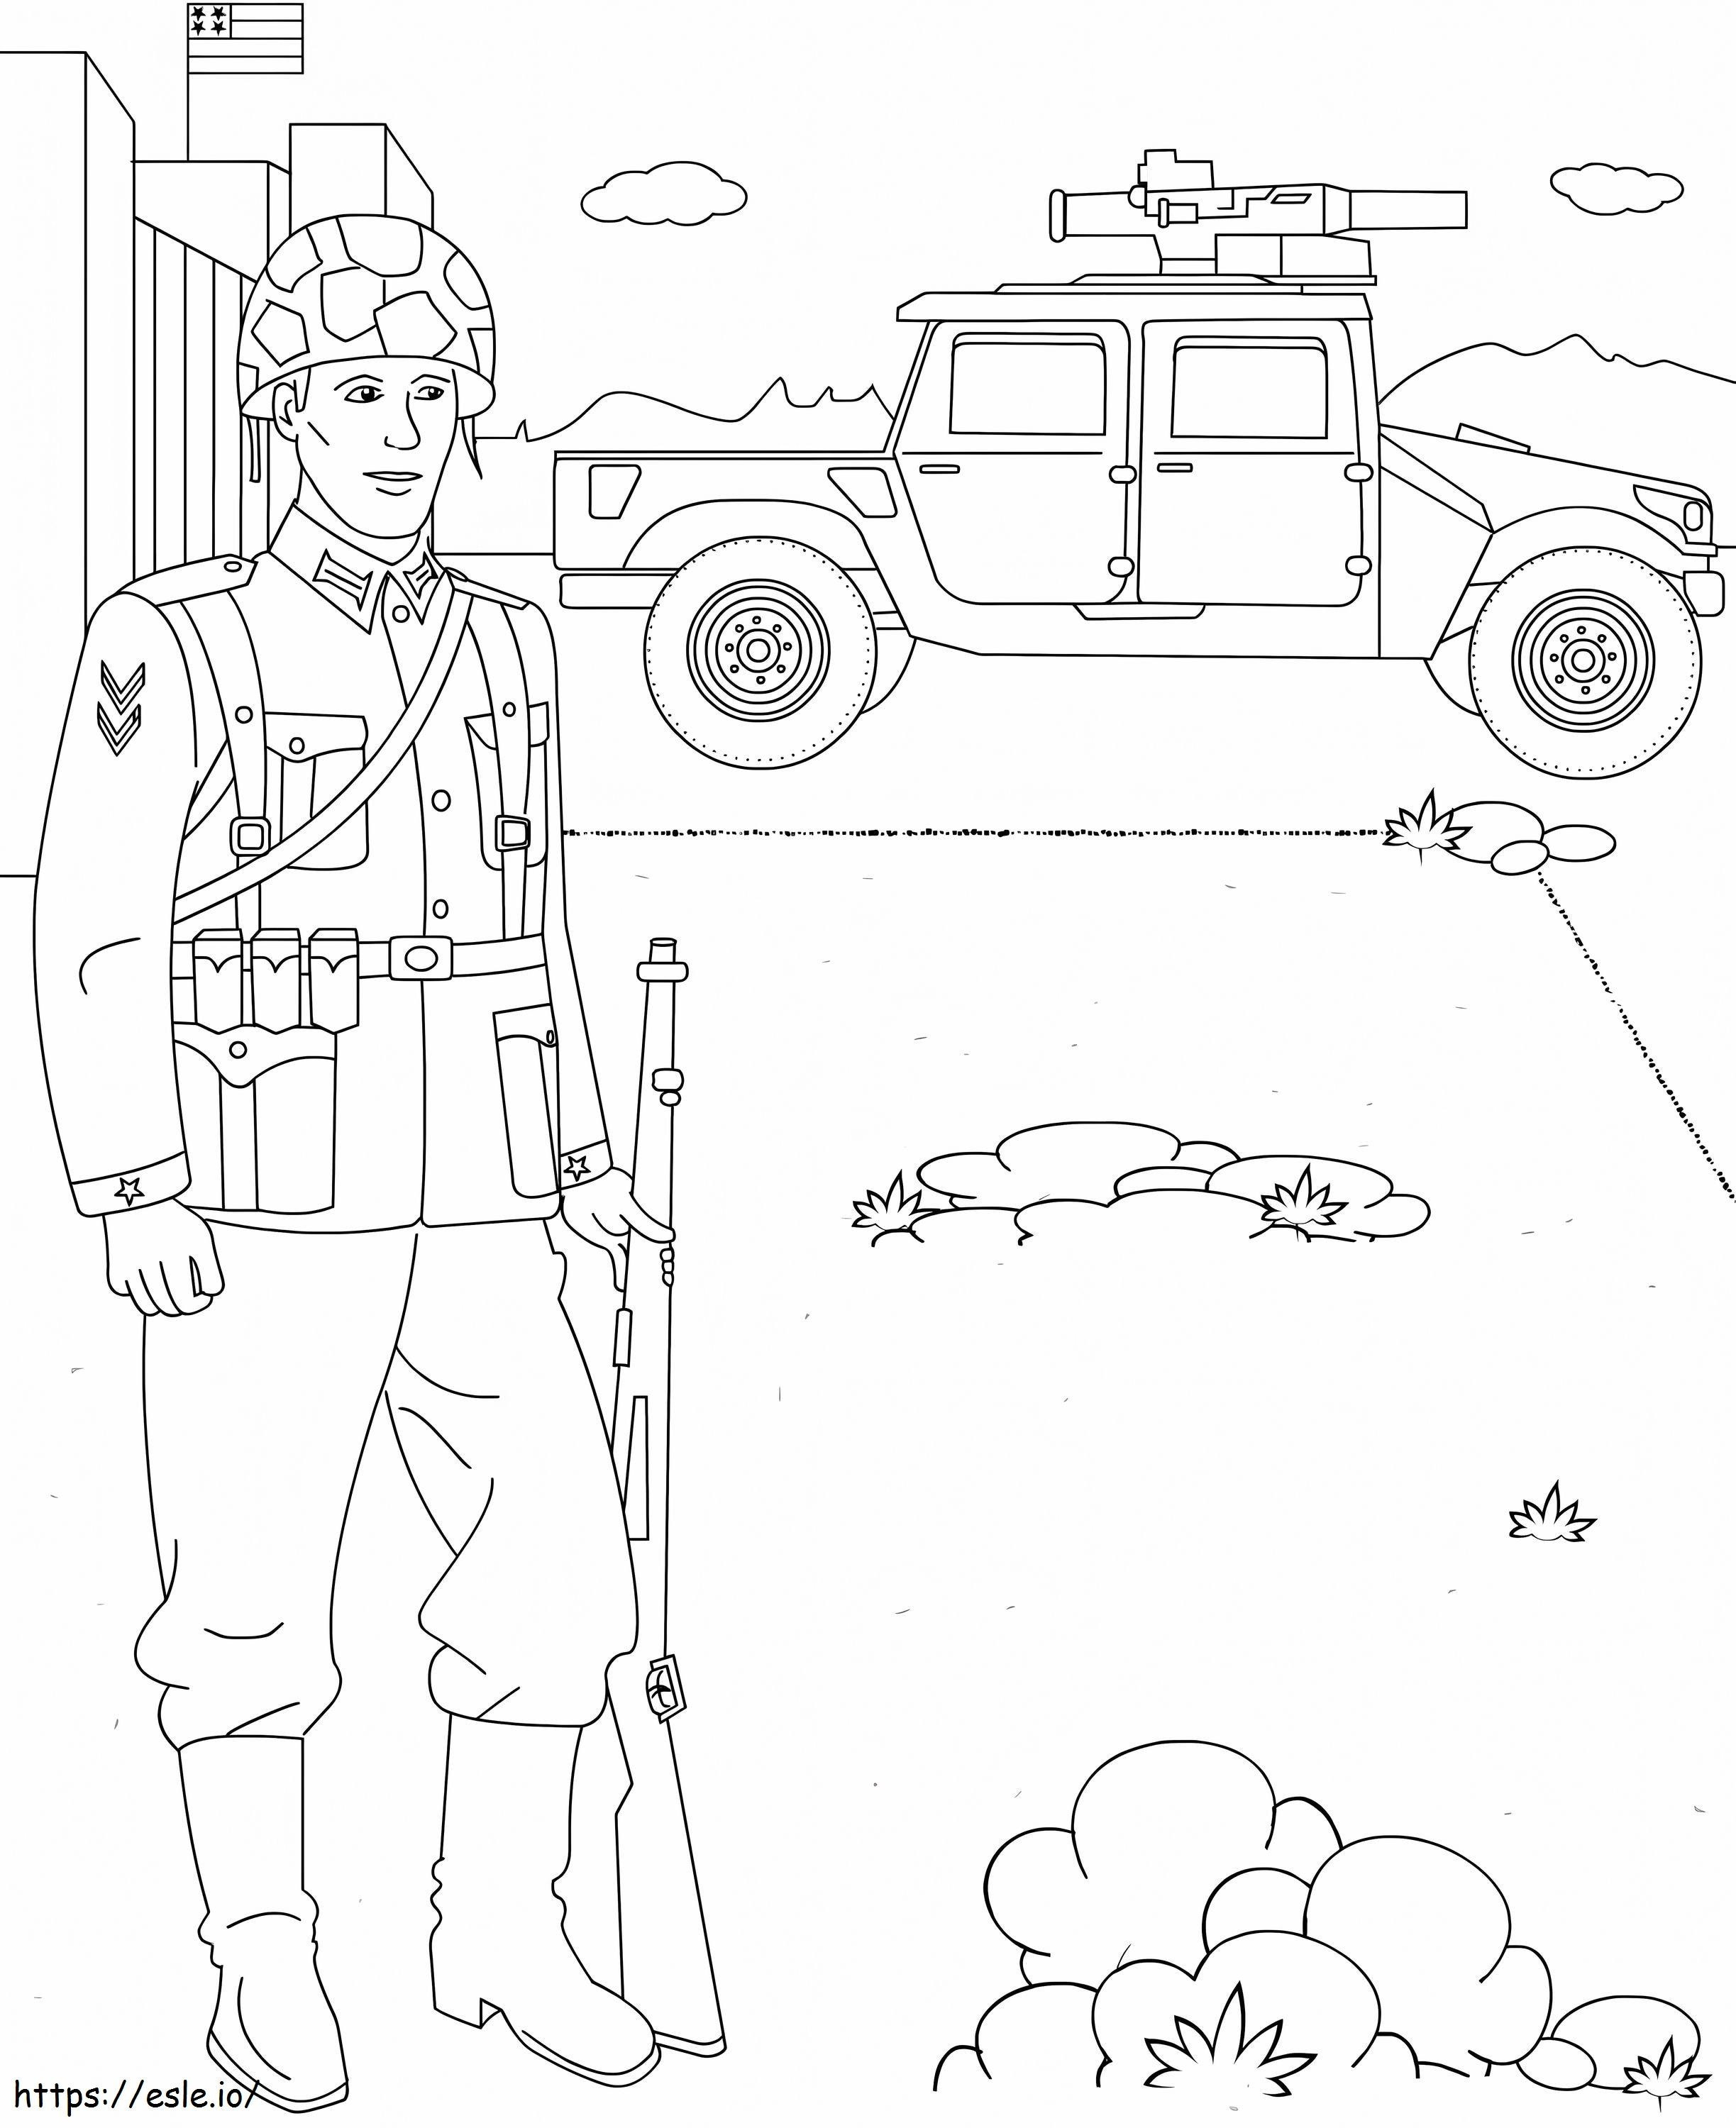 Soldier With Weapon coloring page